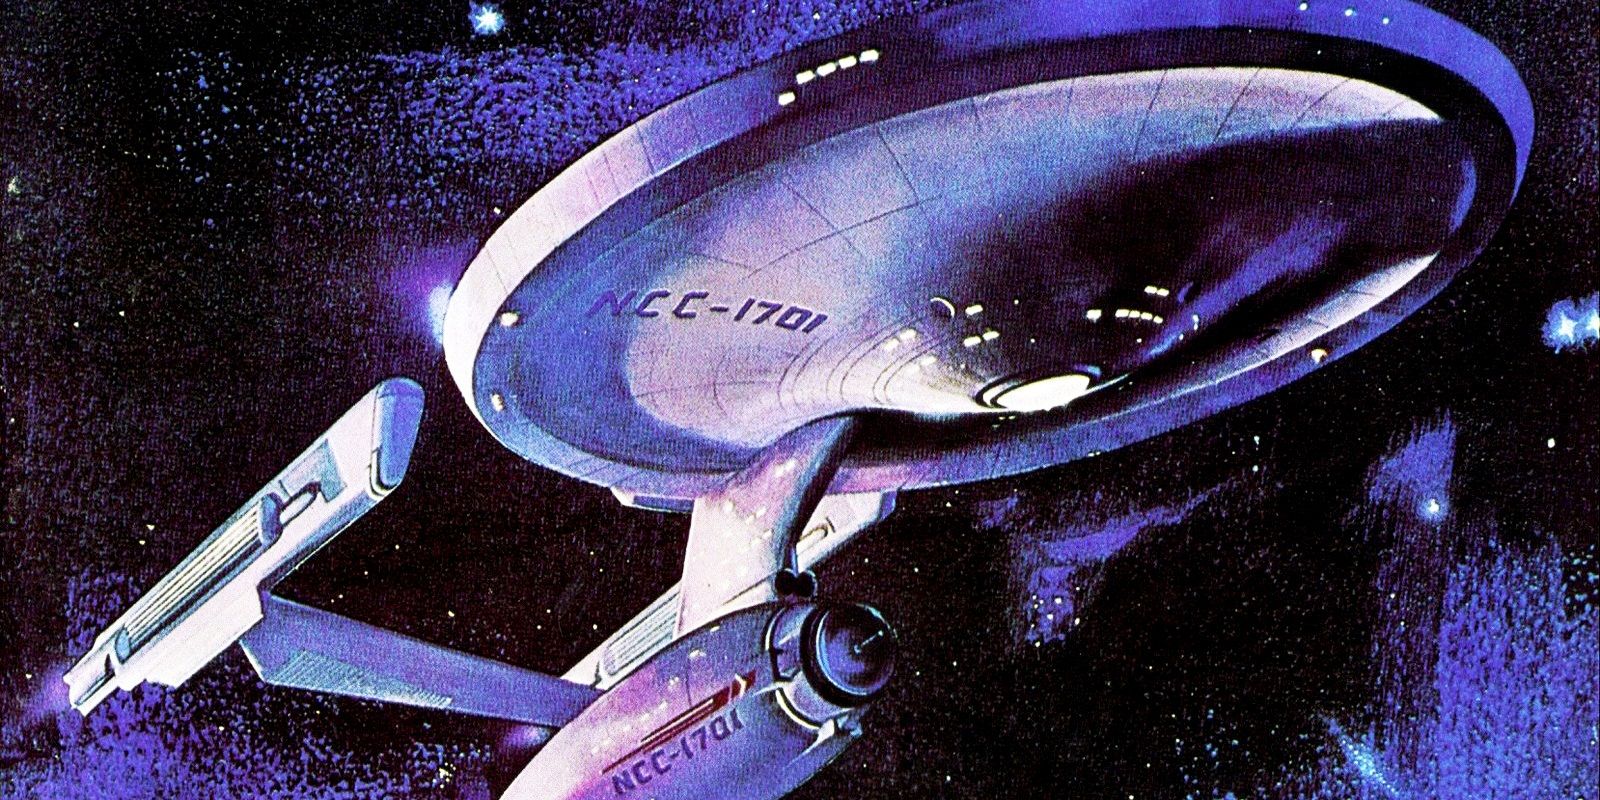 Mike Minor Drawing of the Star Trek Phase II Enterprise refit, the ship against a painted blue and black sky via Paramount